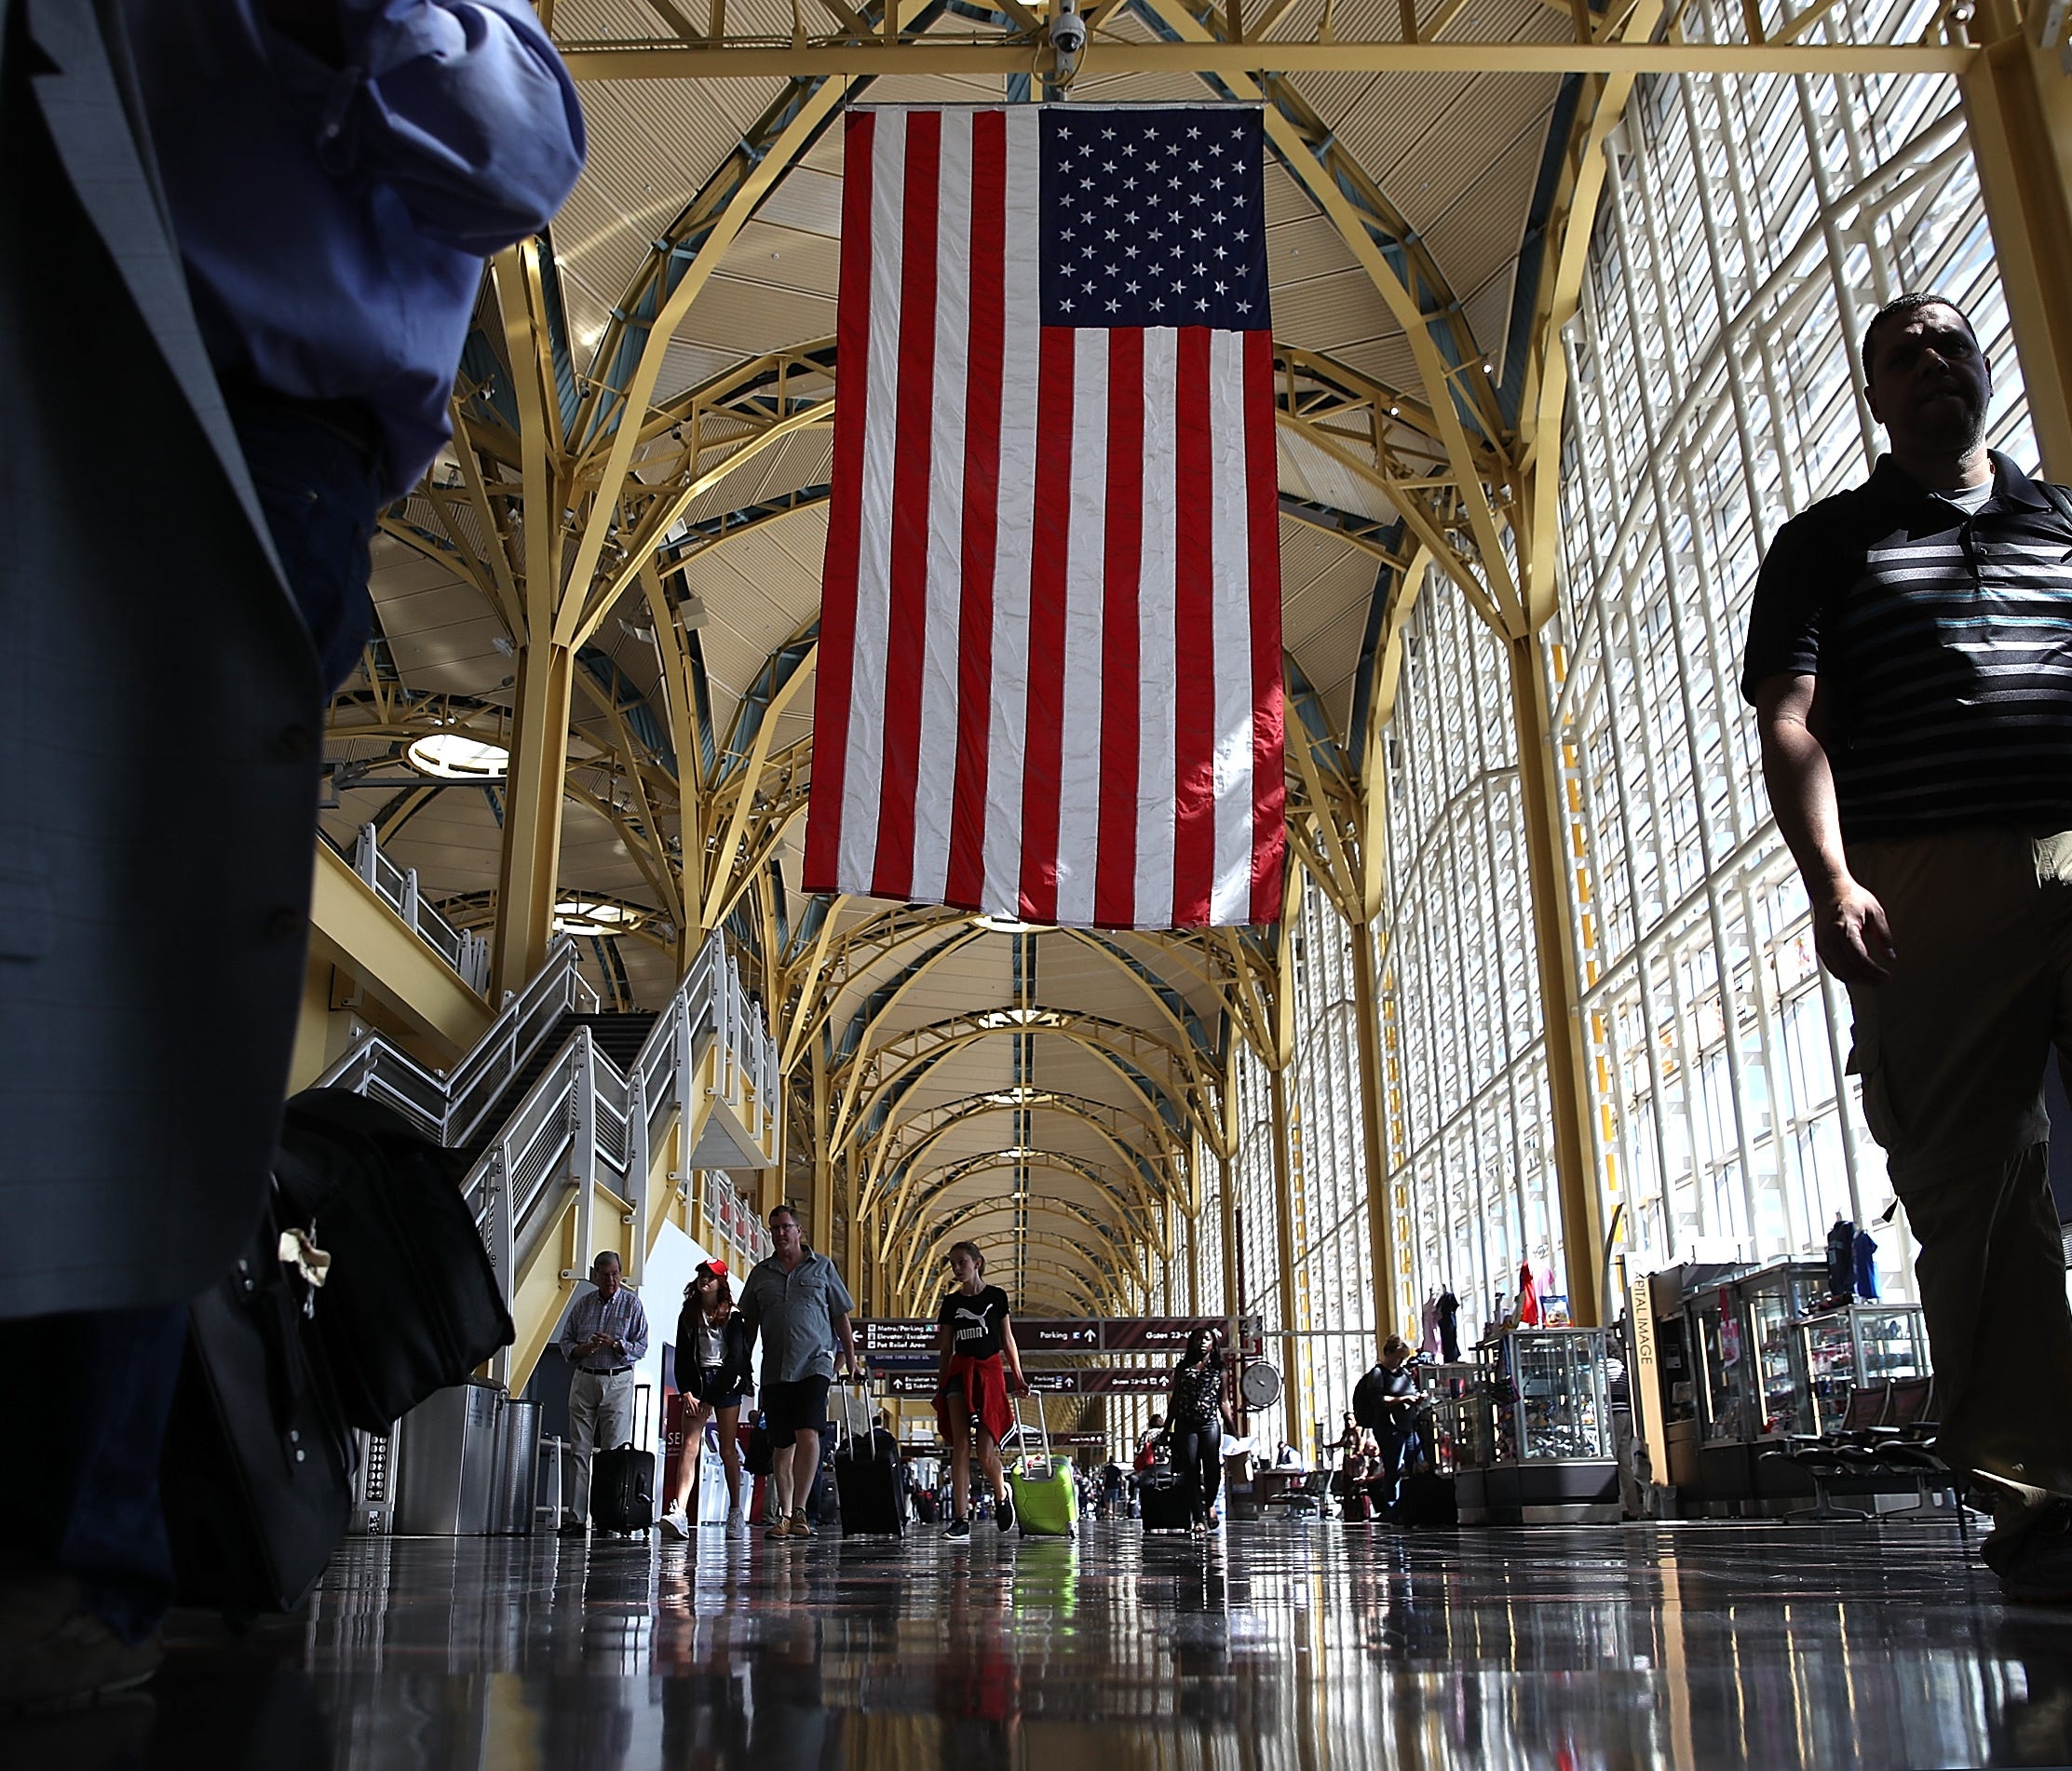 Travelers walk to their gates in the concourse of Reagan National Airport in advance of the Fourth of July holiday.